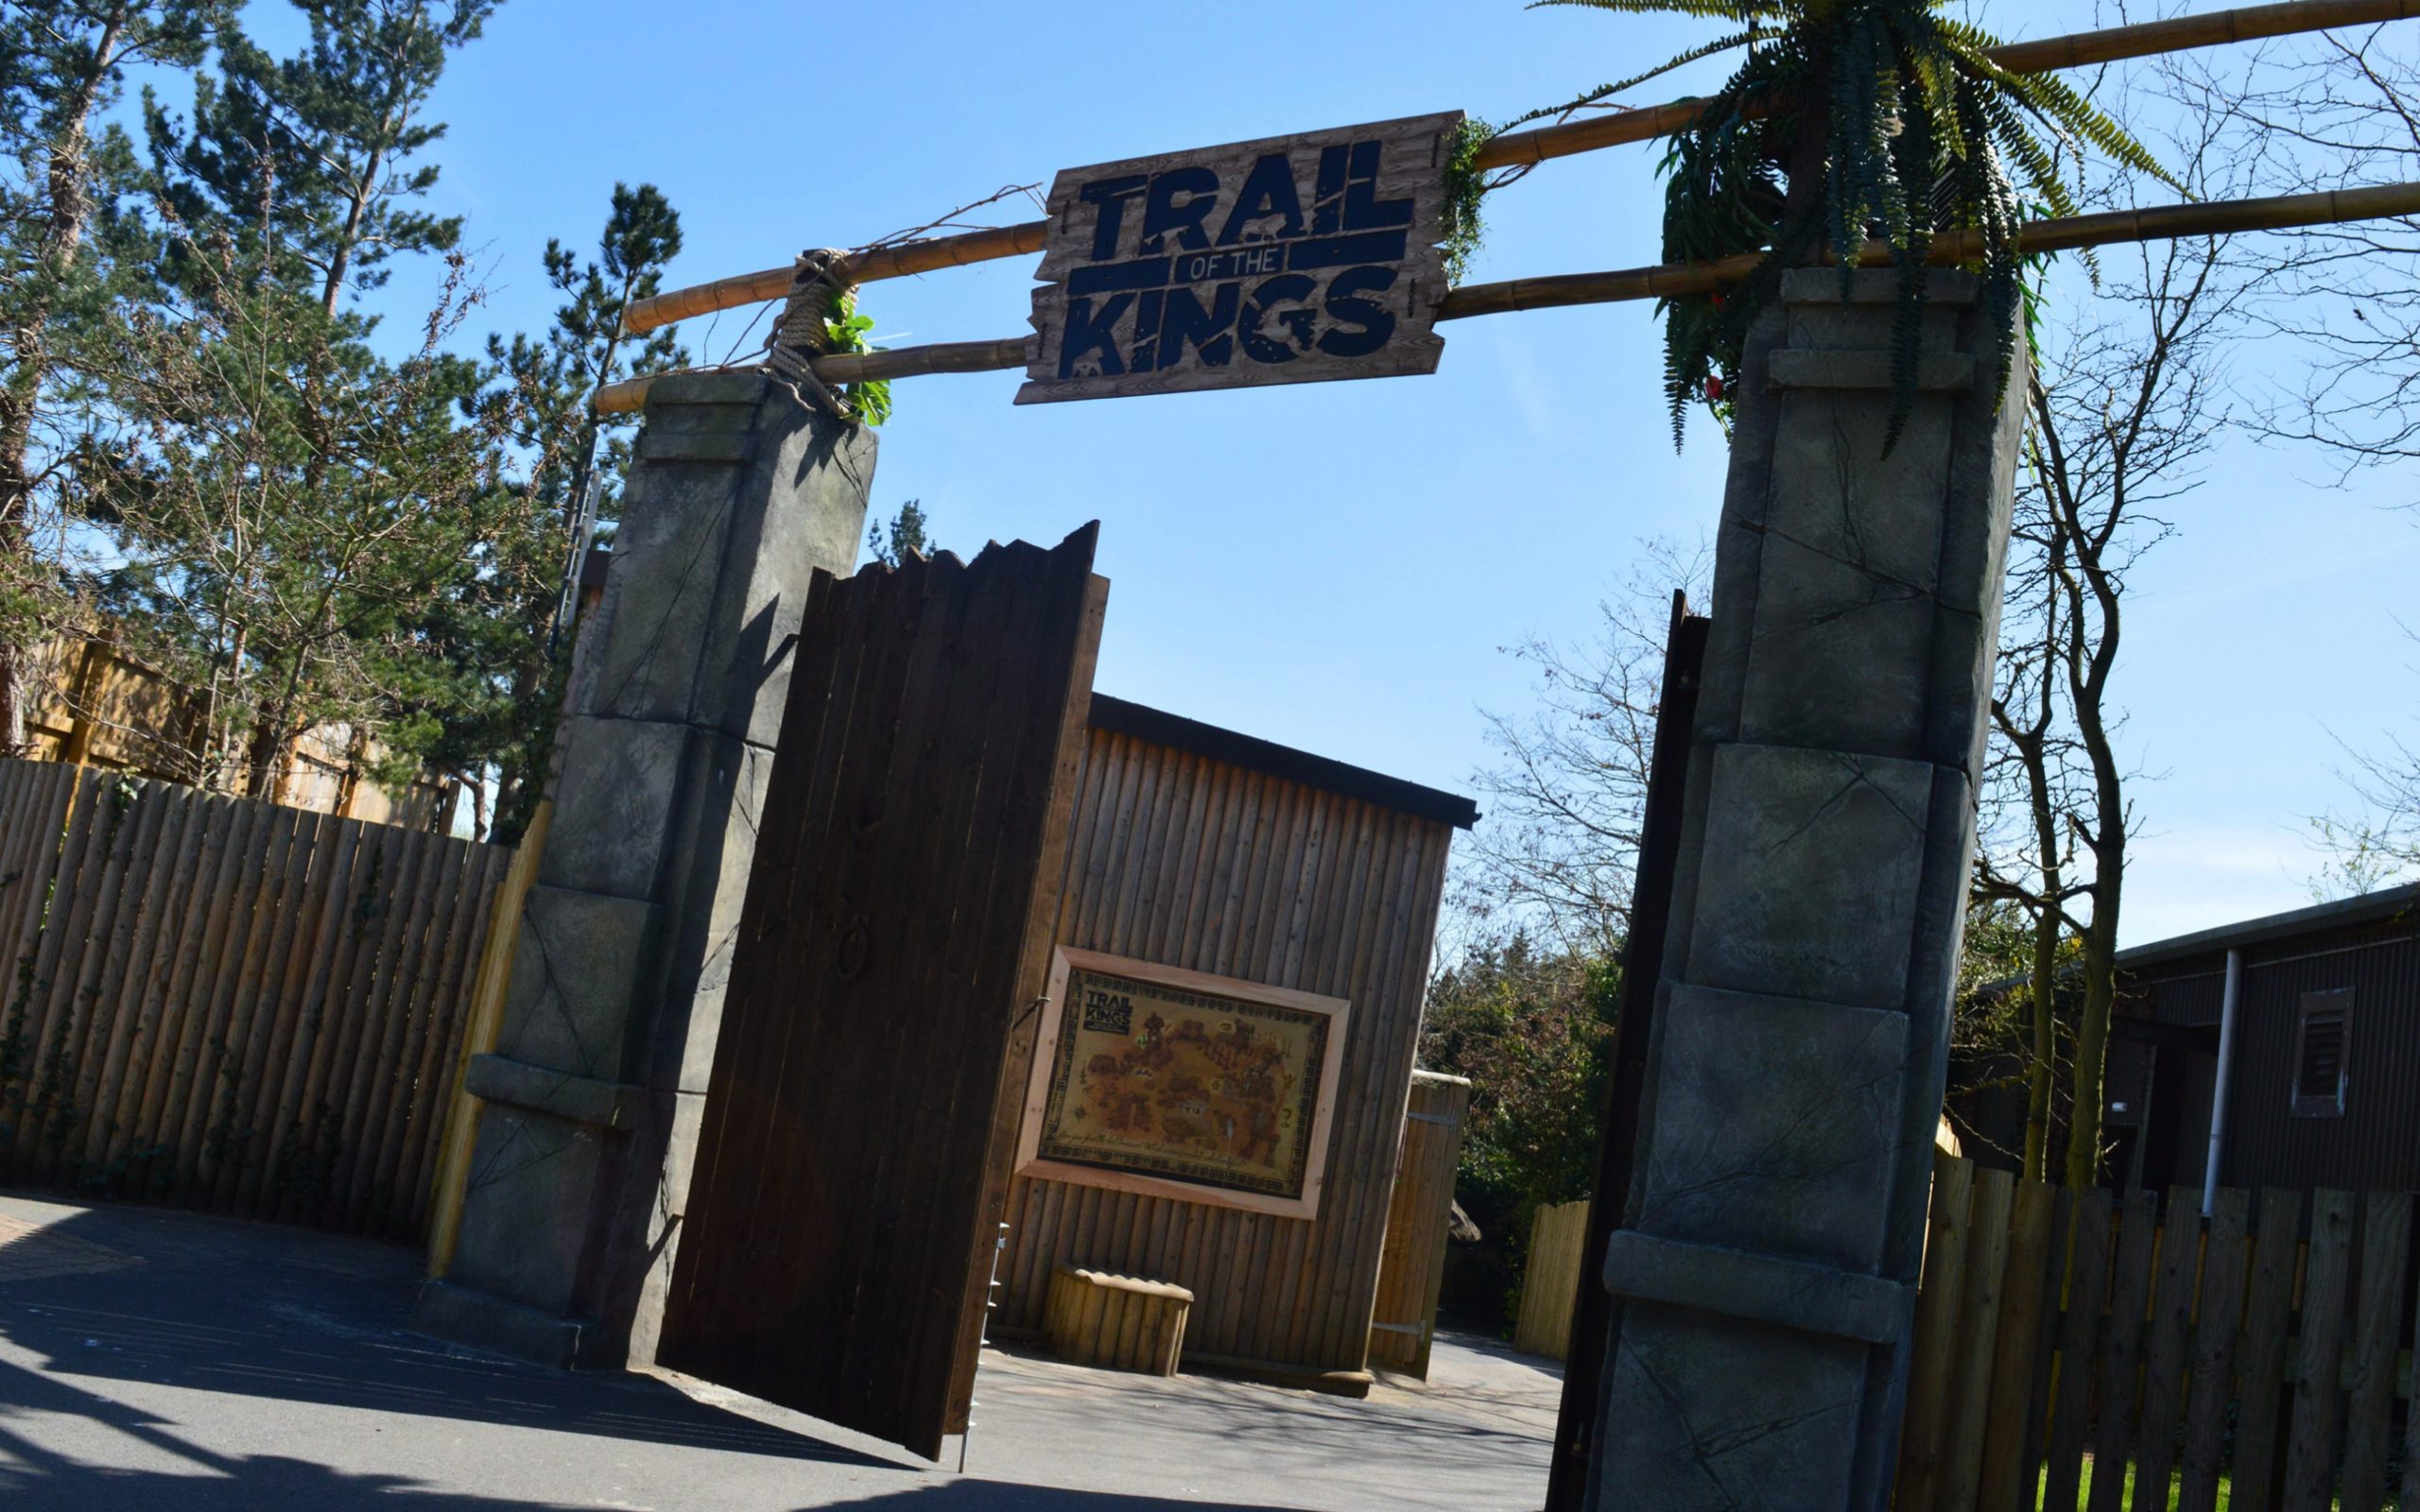 Trail of the kings entrance